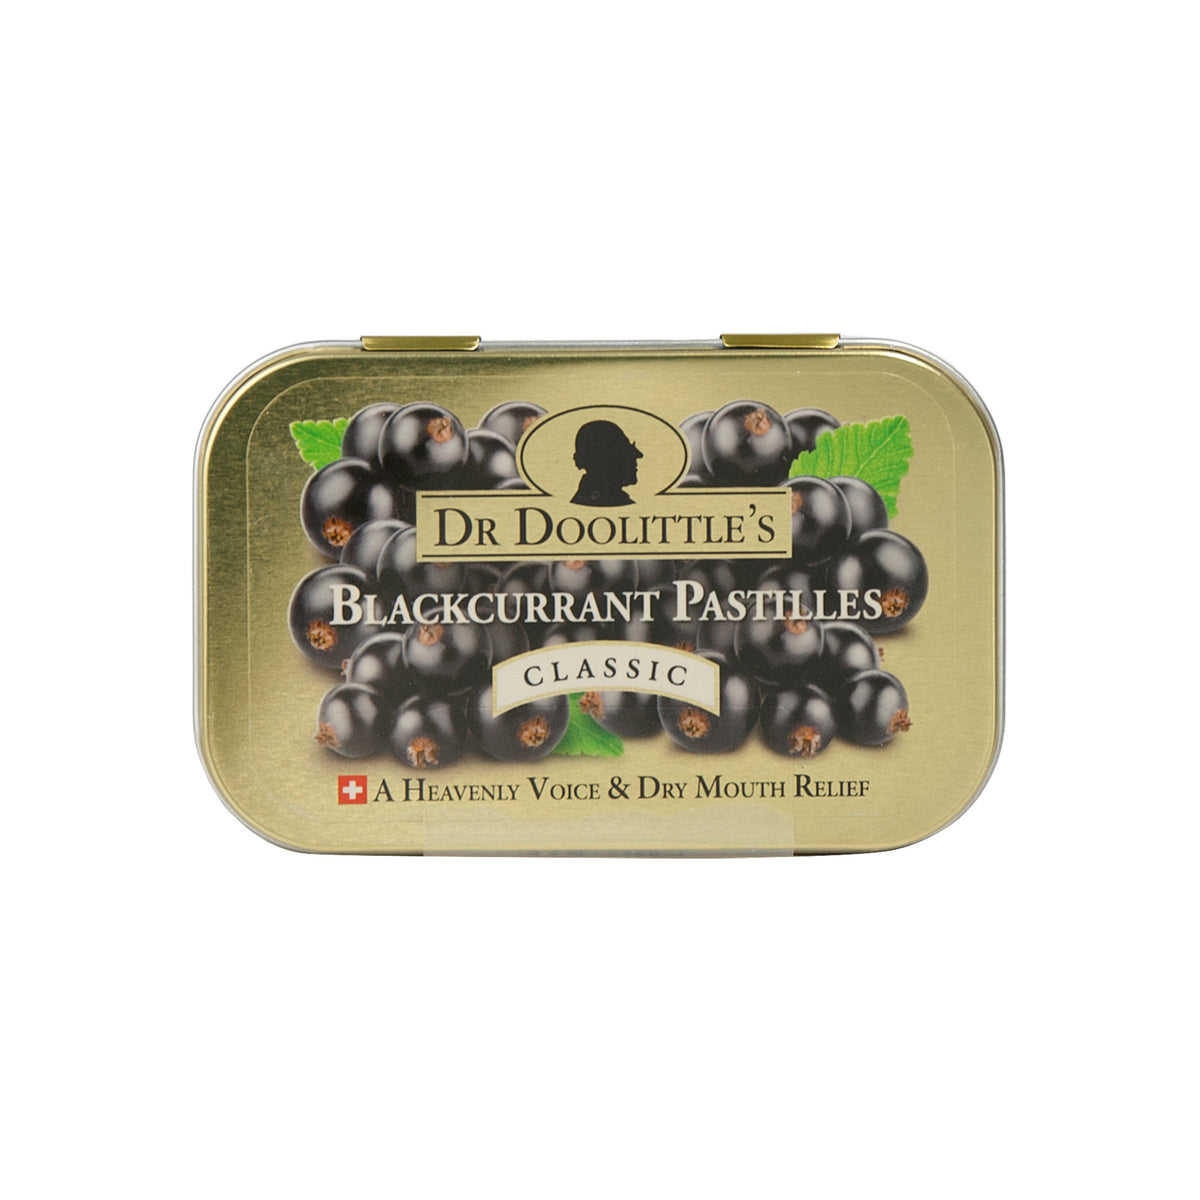 Primary image of Blackcurrant Pastilles Classic